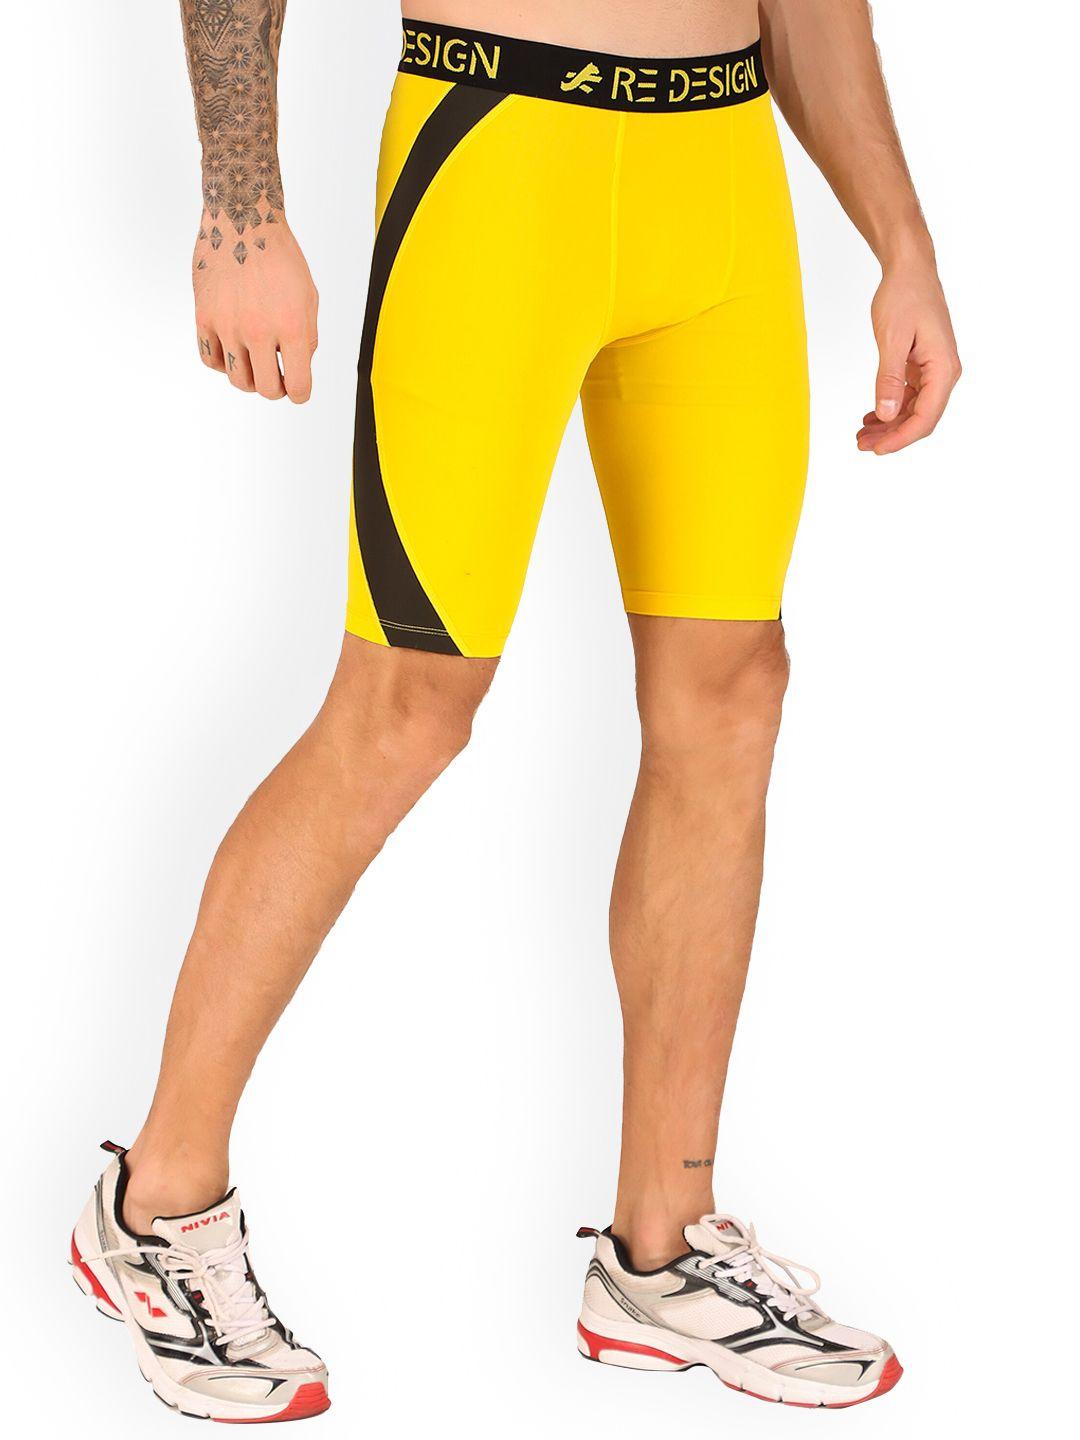 redesign men rapid-dry skinny fit running sports shorts